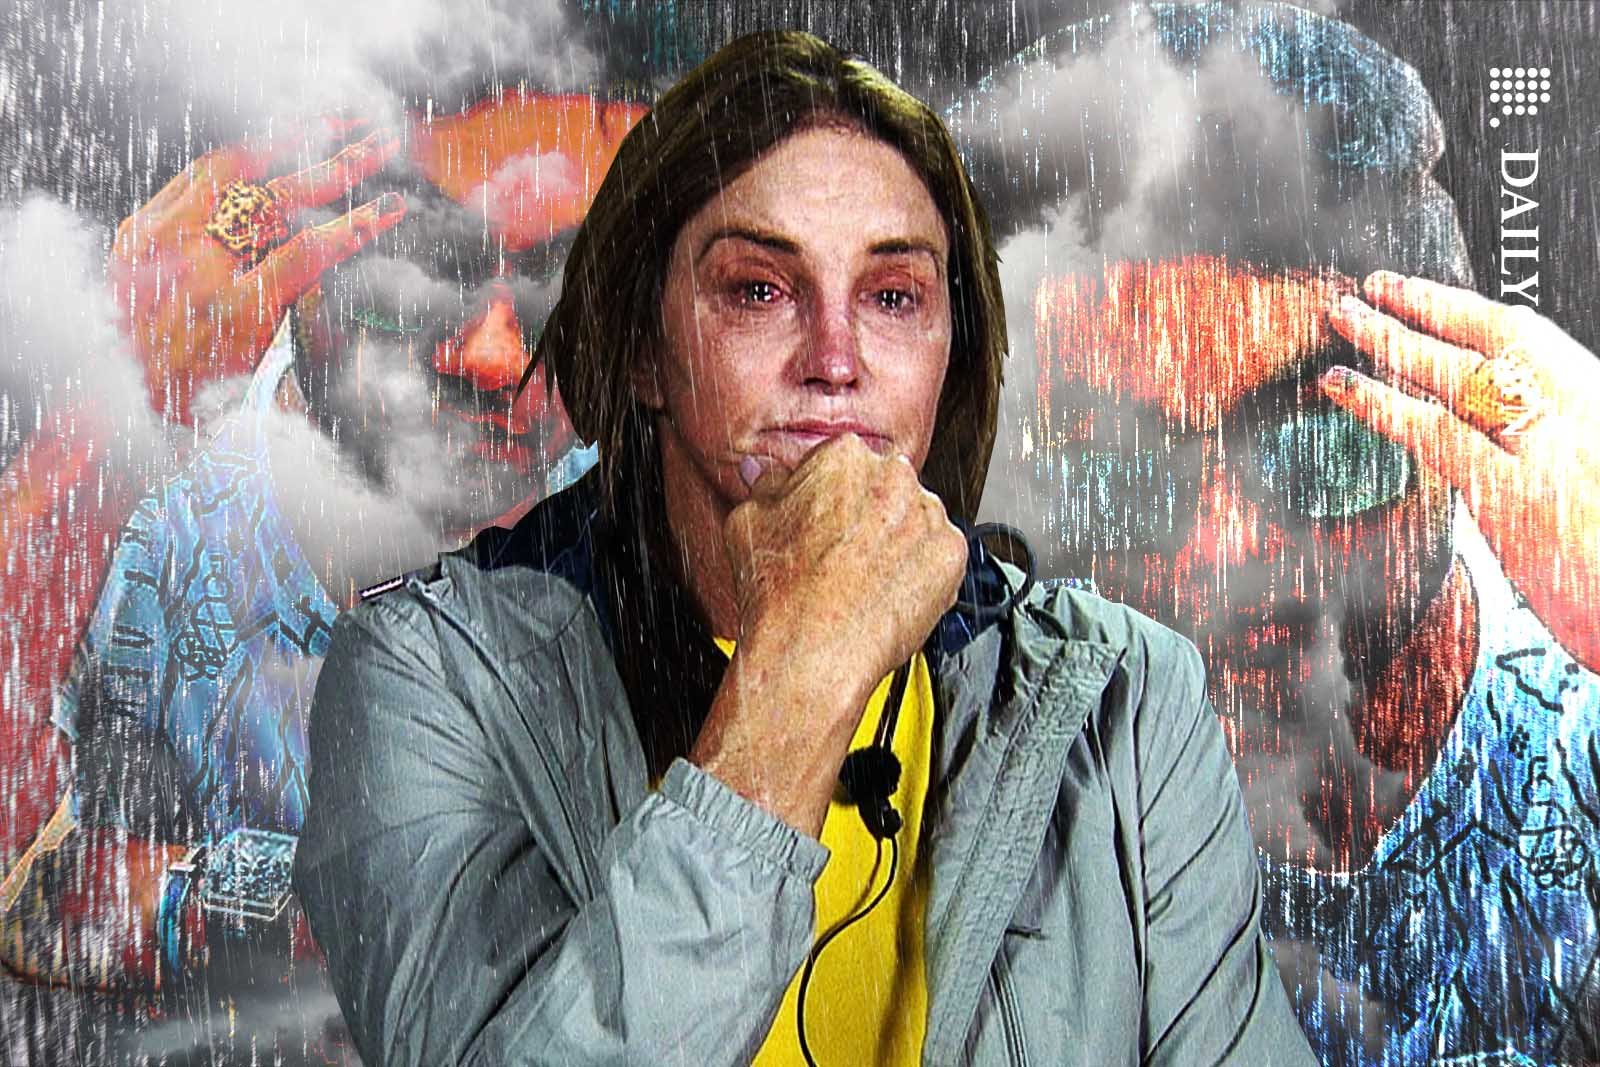 Caityn Jenner crying in the rain with Sahil Arora in the background.